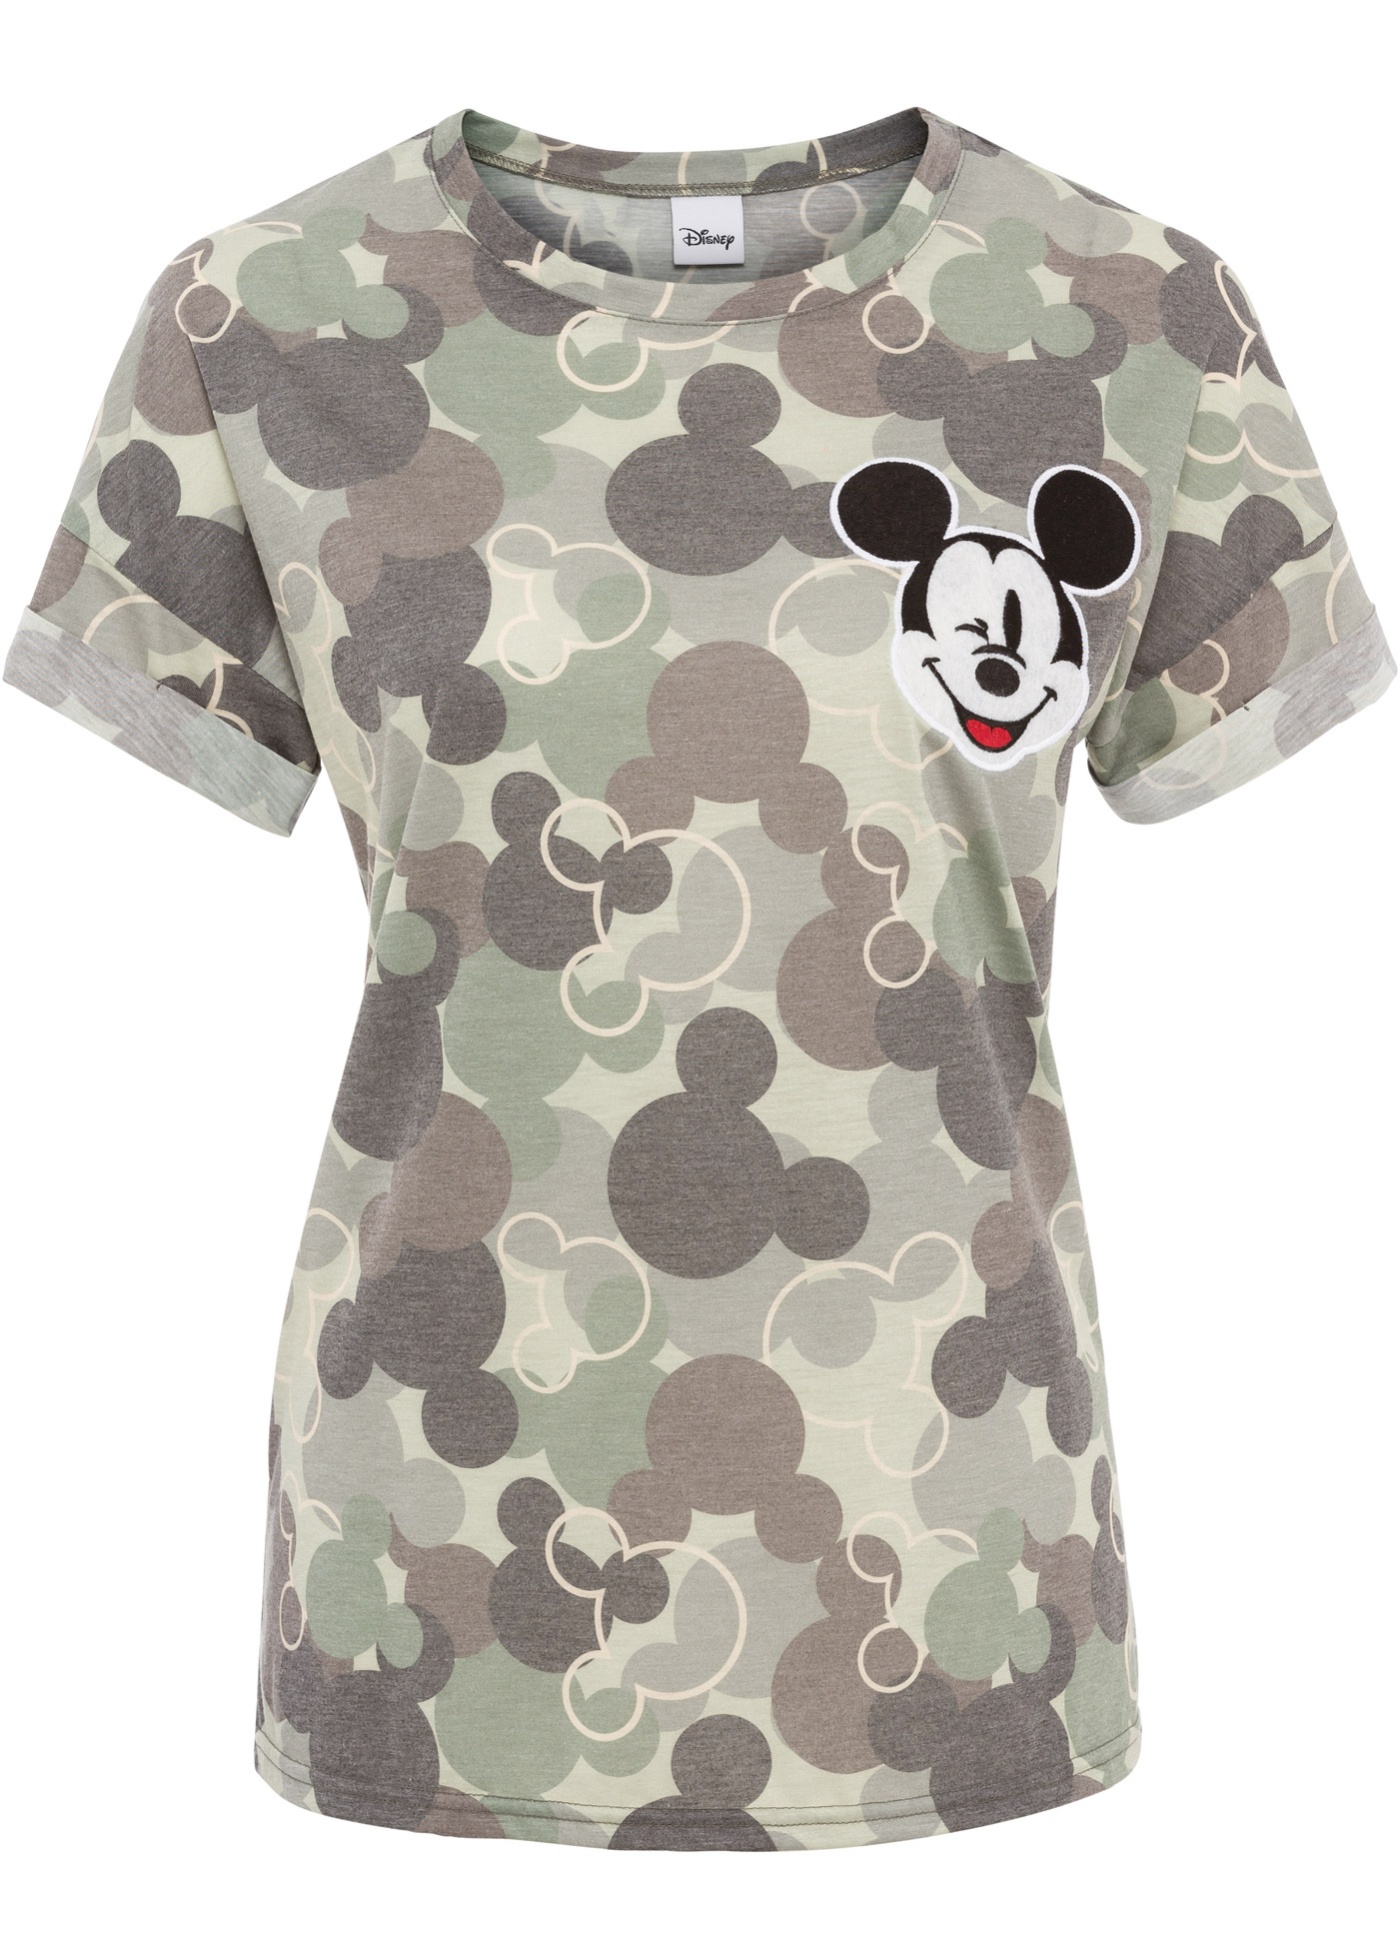 Shirt Mickey Mouse camouflage